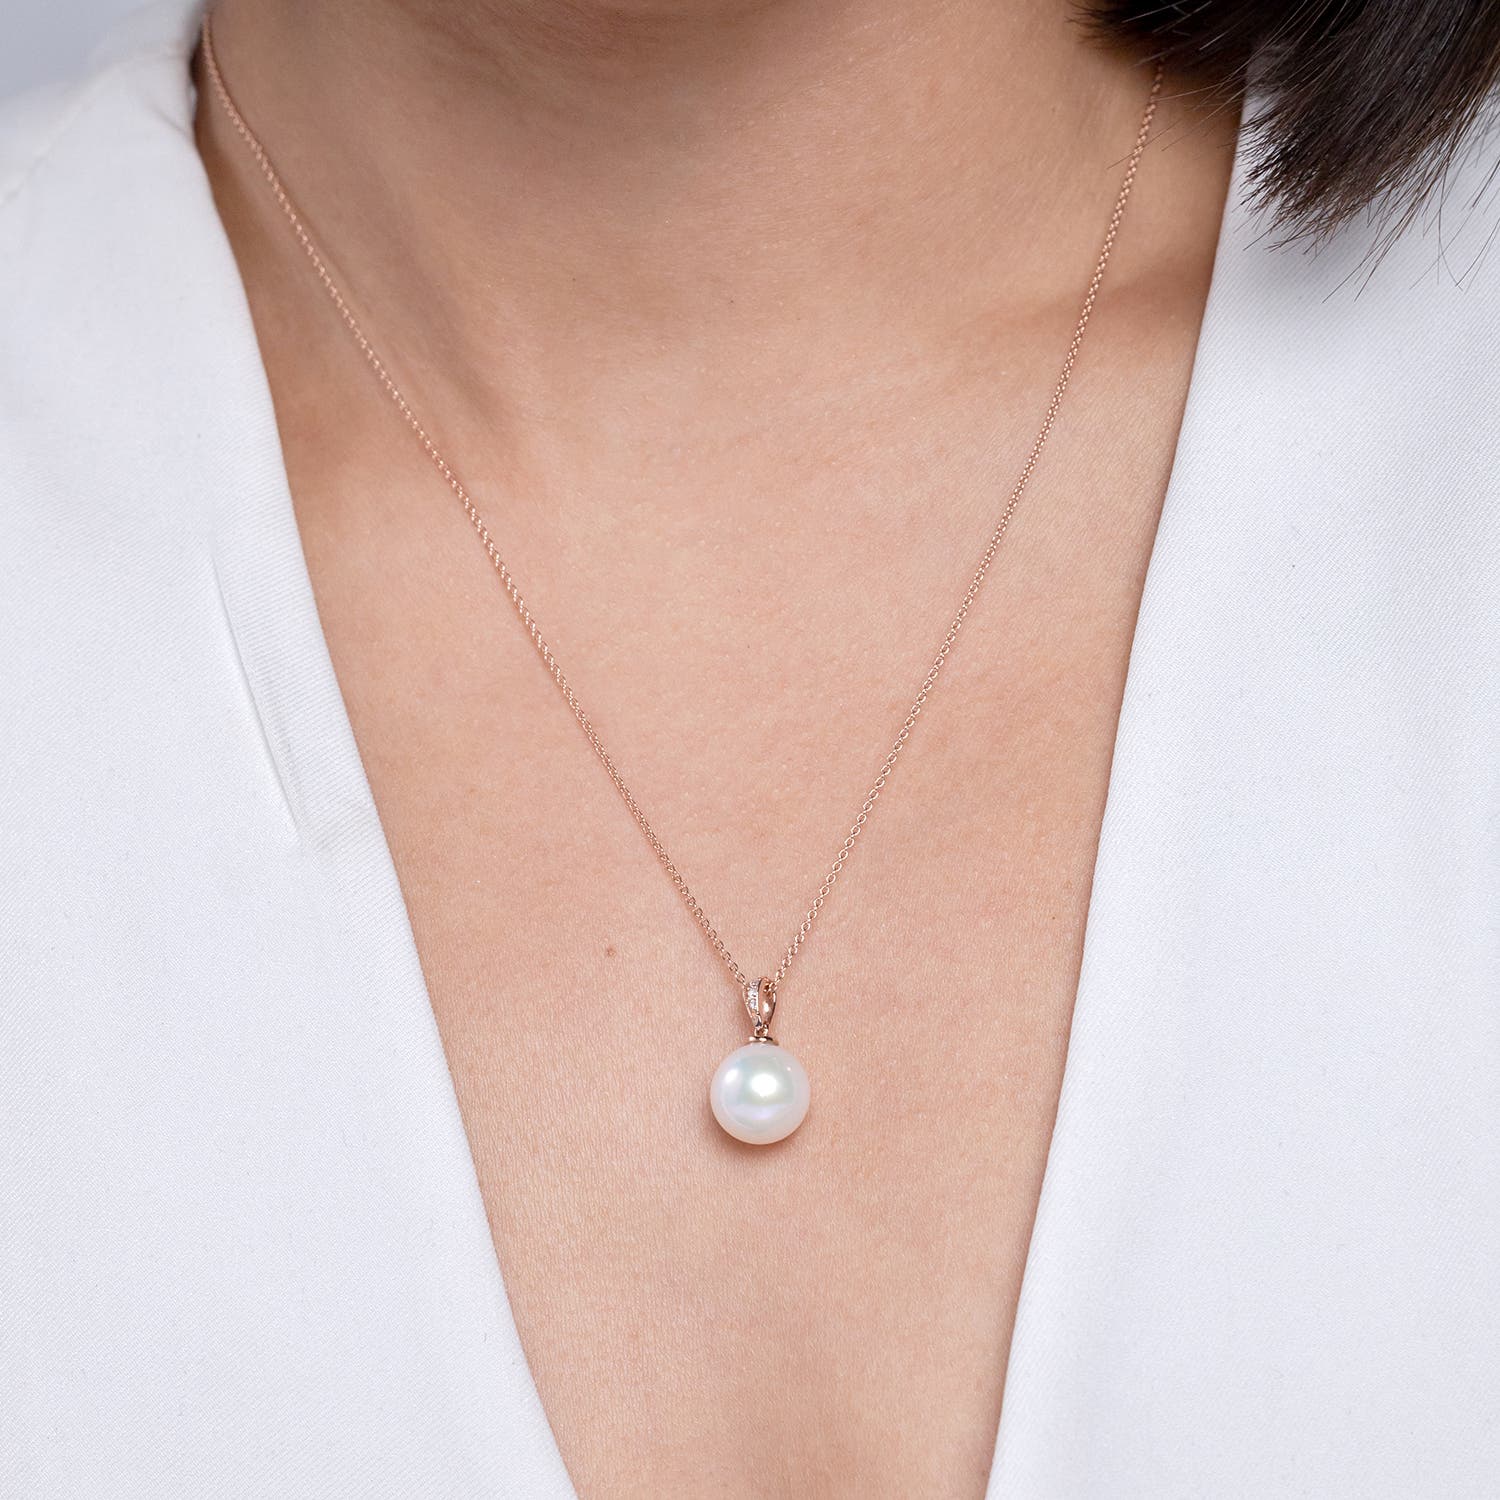 Solitaire Freshwater Pearl Pendant with Diamonds | Angara